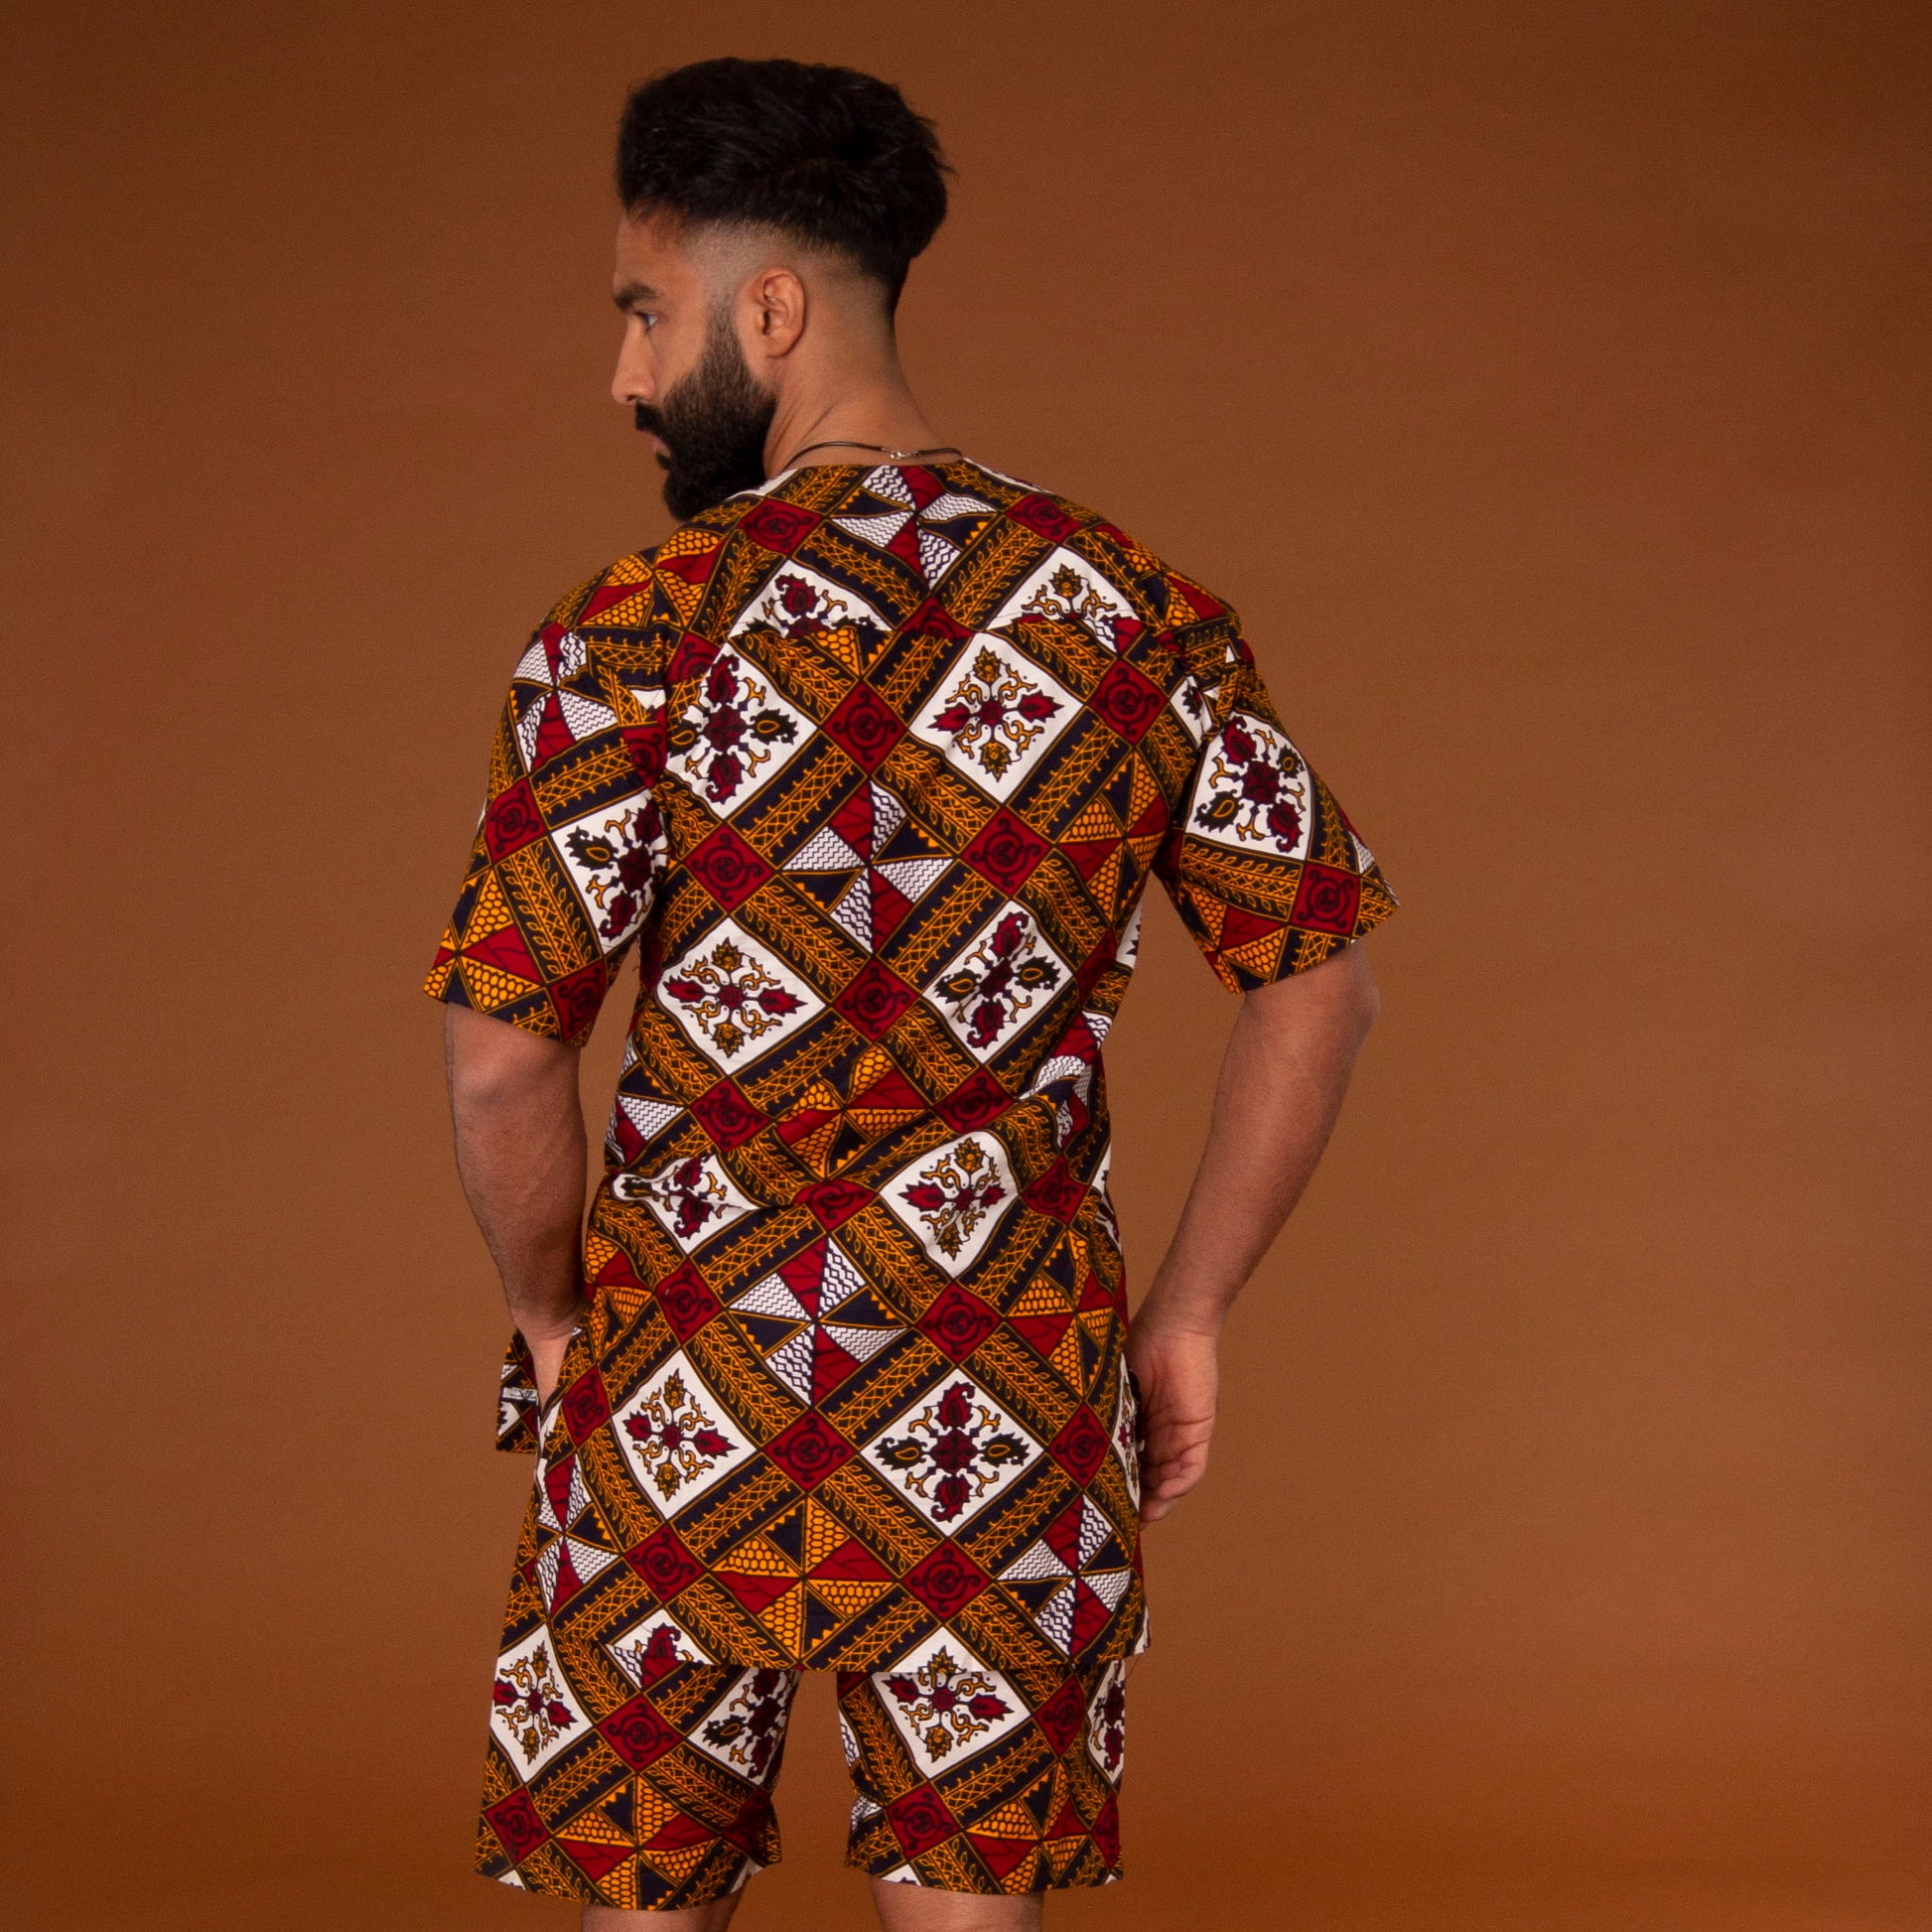 African print kaftan top with black crepe trim and matching shorts with drawstring waist hand-made from red, yellow, white and black ankara wax print in a geometric pattern